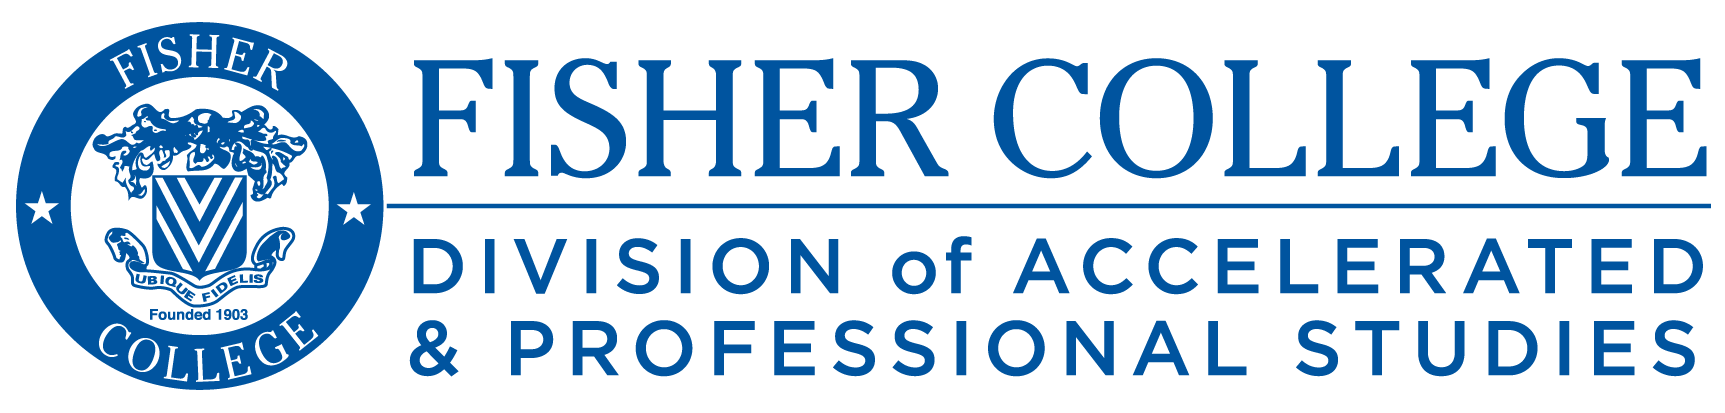 Fisher College - Division of Accelerated and Professional Studies